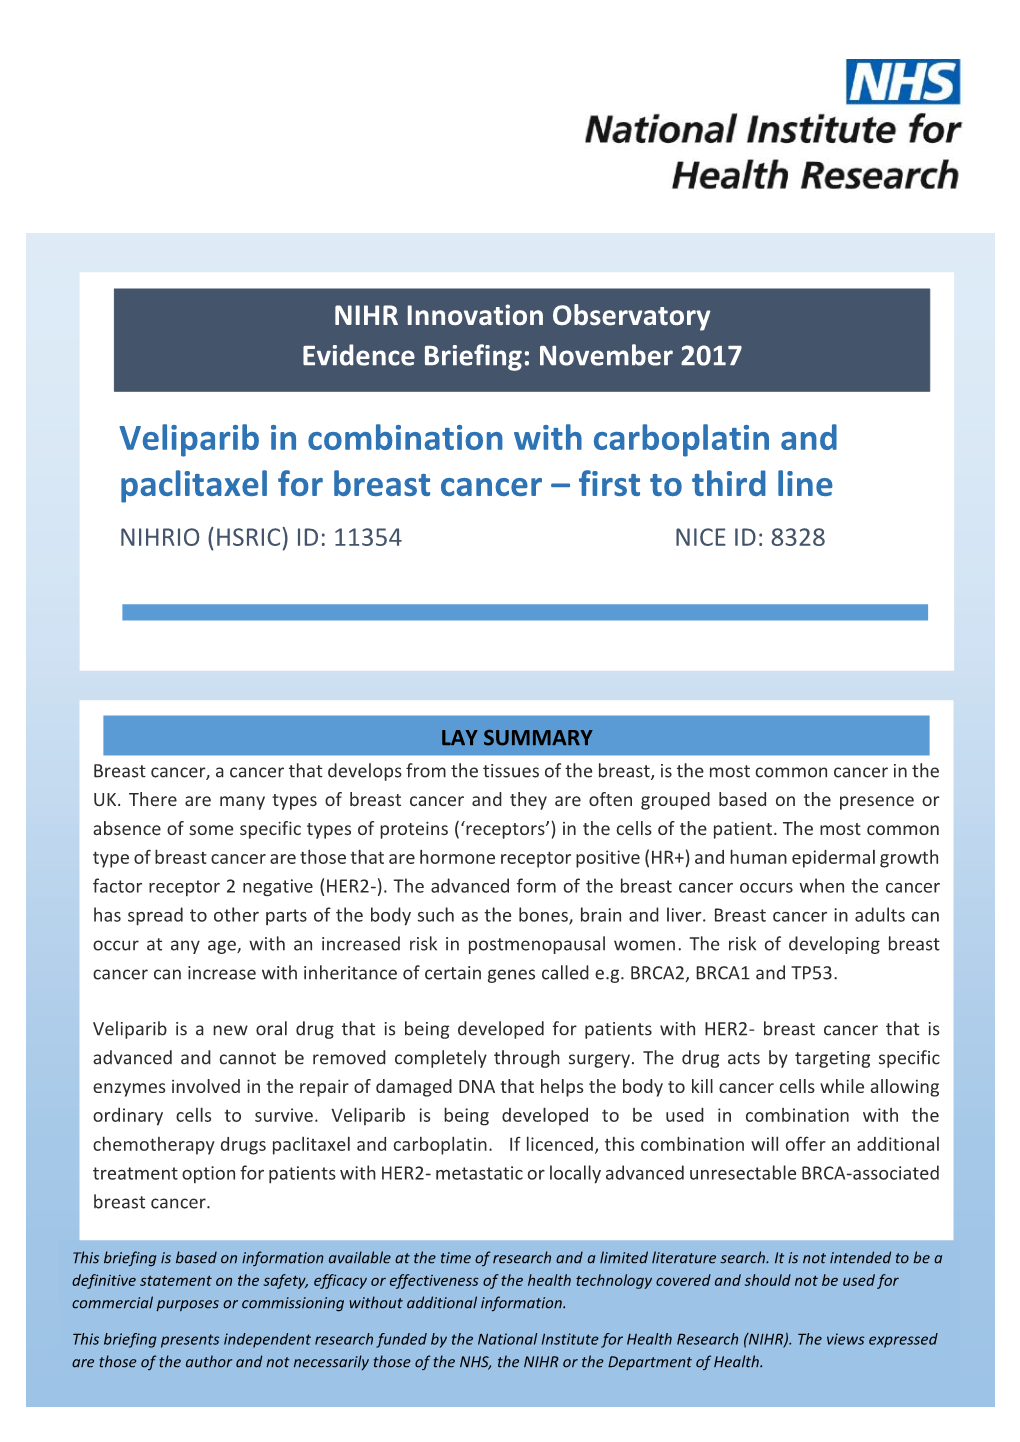 Veliparib in Combination with Carboplatin and Paclitaxel for Breast Cancer – First to Third Line NIHRIO (HSRIC) ID: 11354 NICE ID: 8328